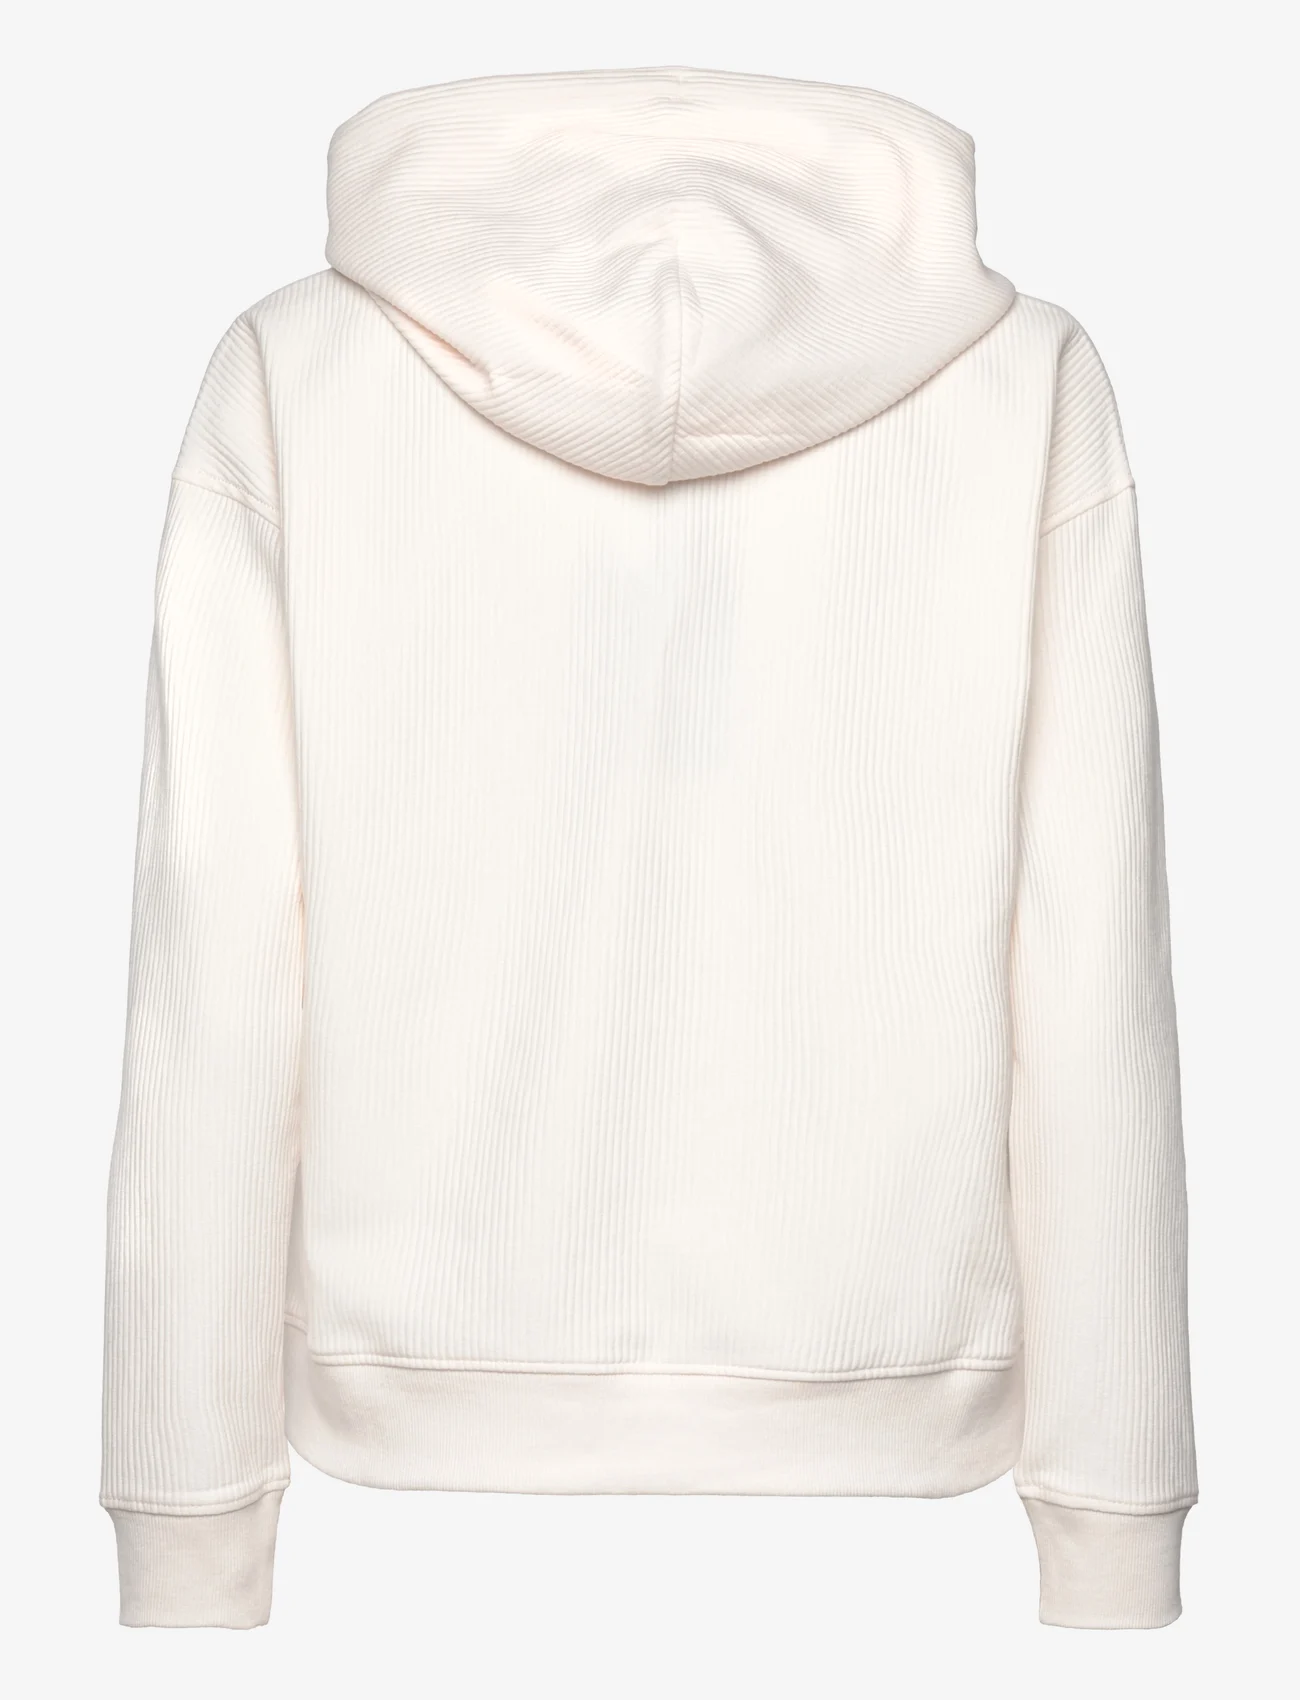 Tommy Jeans - TJW BXY OTTOMAN HOODIE - hoodies - ancient white - 1